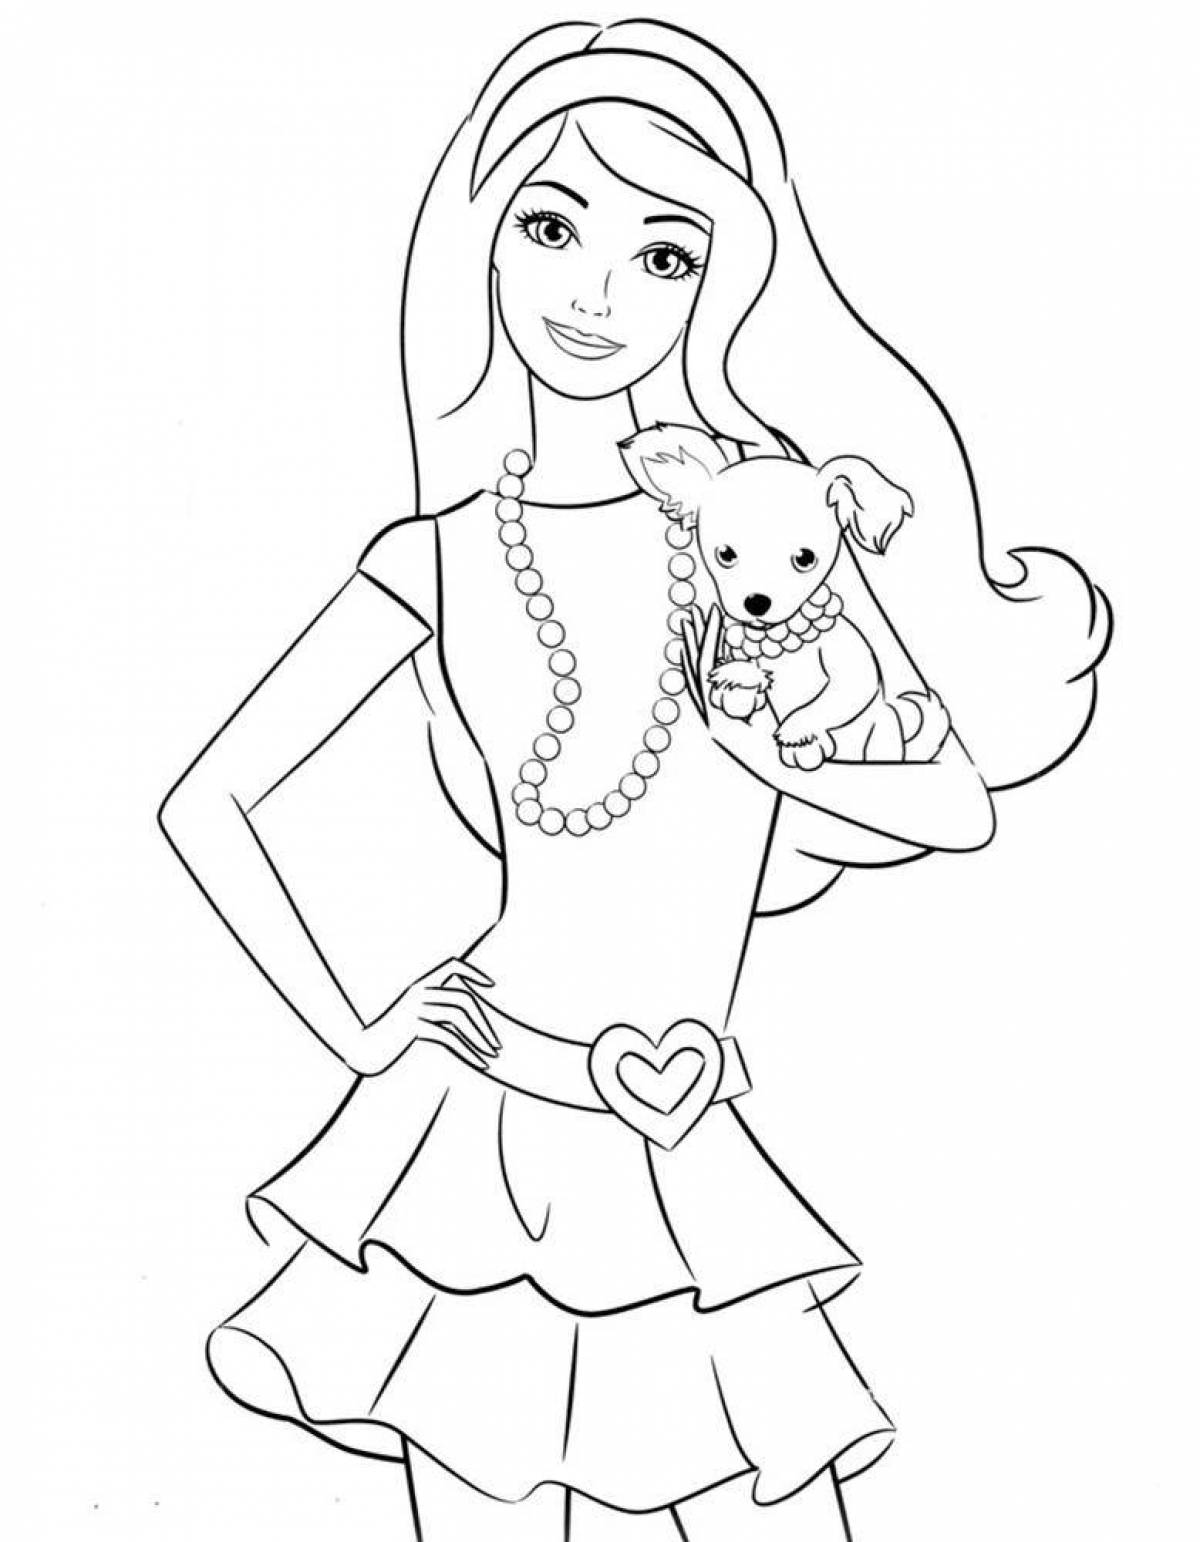 Delightful barbie coloring pictures